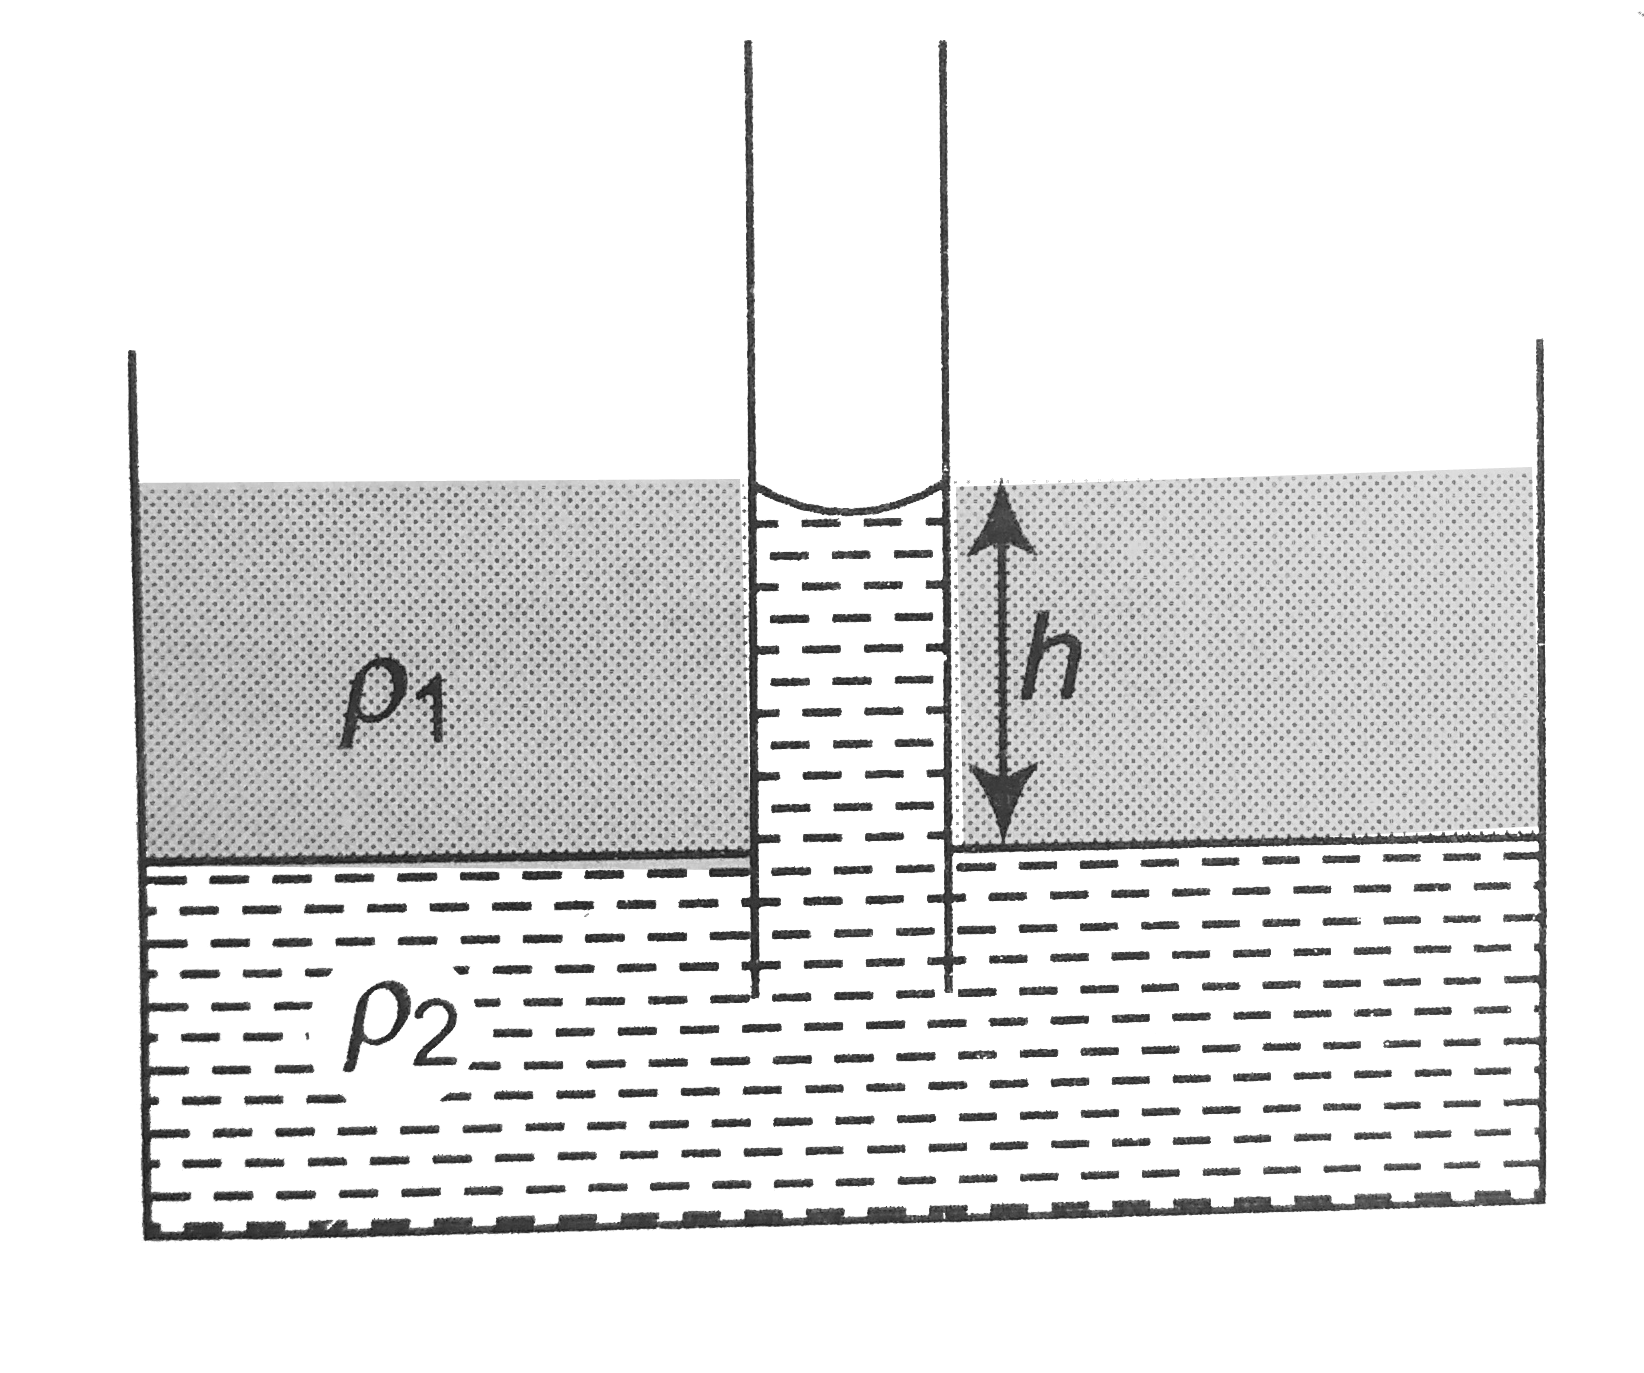 A container is partially filled with a liquid of density rho2 A capillary tube of radius r is vertically inserted in this liquid. Now another liquid of density rho1(rho1ltrho2) is slowly poured in the container to a height h as shown. There is only denser liquid in the capillary tube. The rise of denser liquid in the capillary tube is also h. Assuming zero contact angle, the surface tension of heavier liquid is